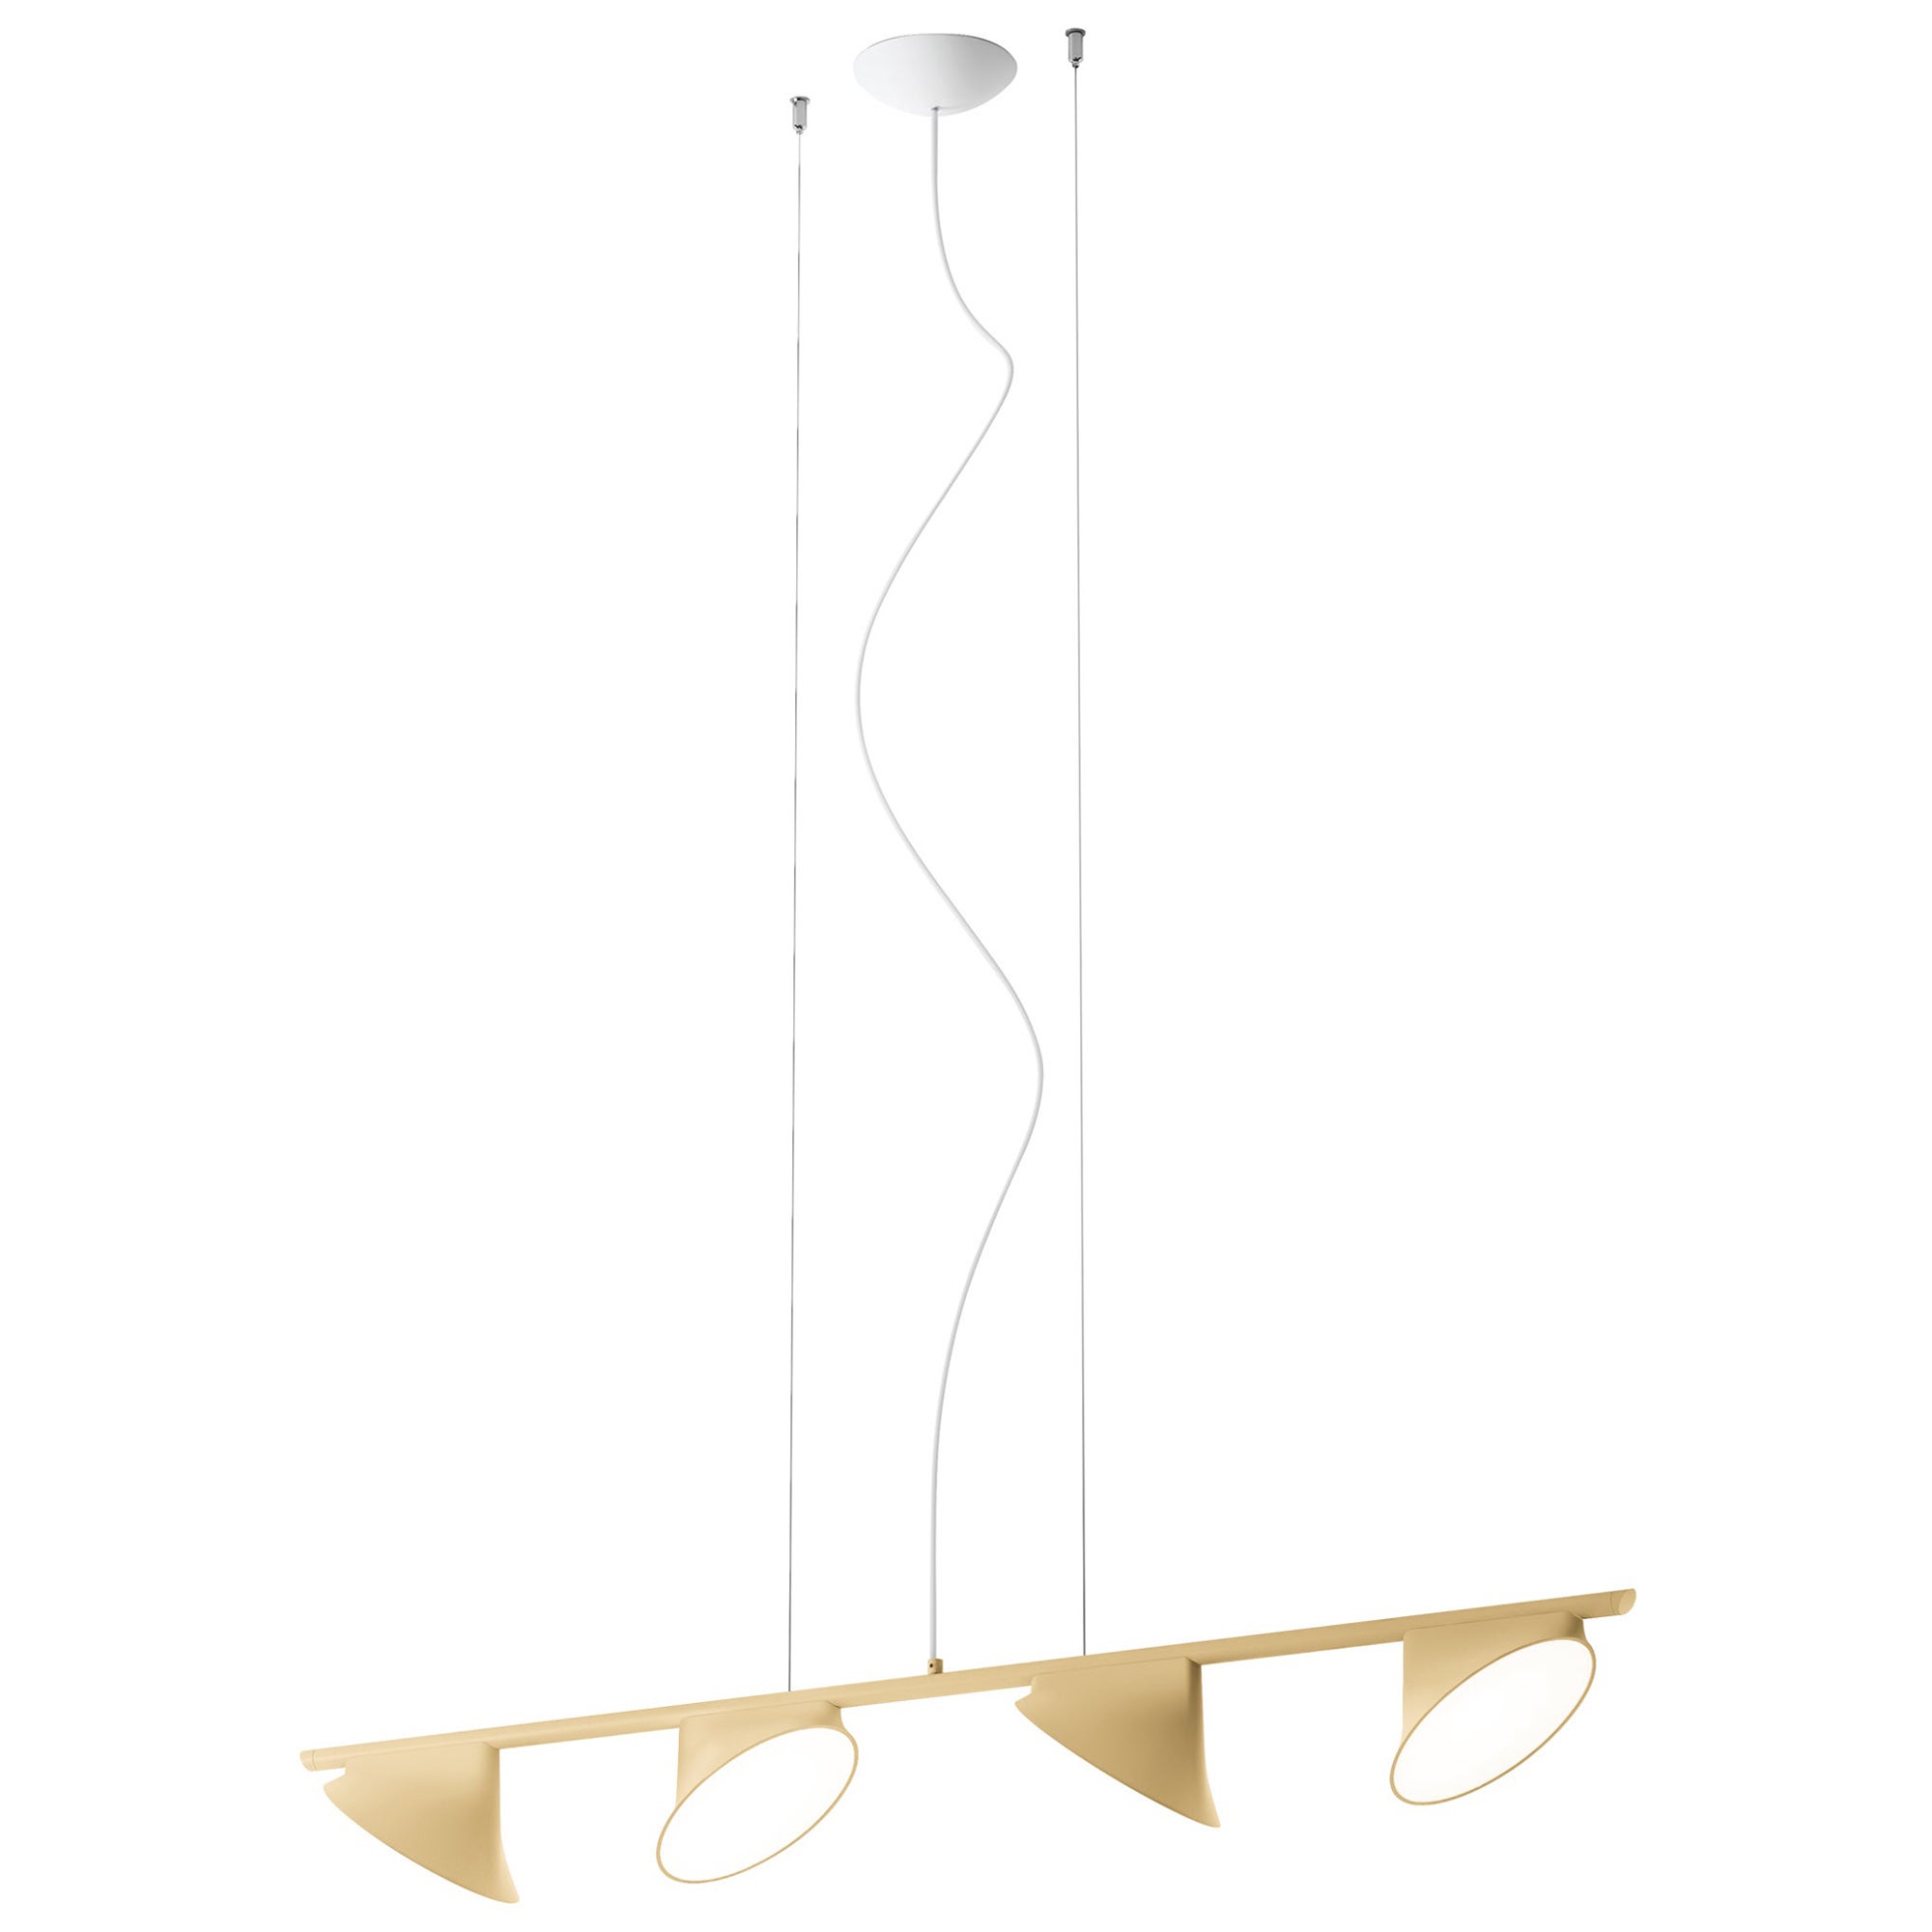 Axolight Orchid 4 Light Pendant Lamp with Aluminum Body in Sand by Rainer Mutsch For Sale